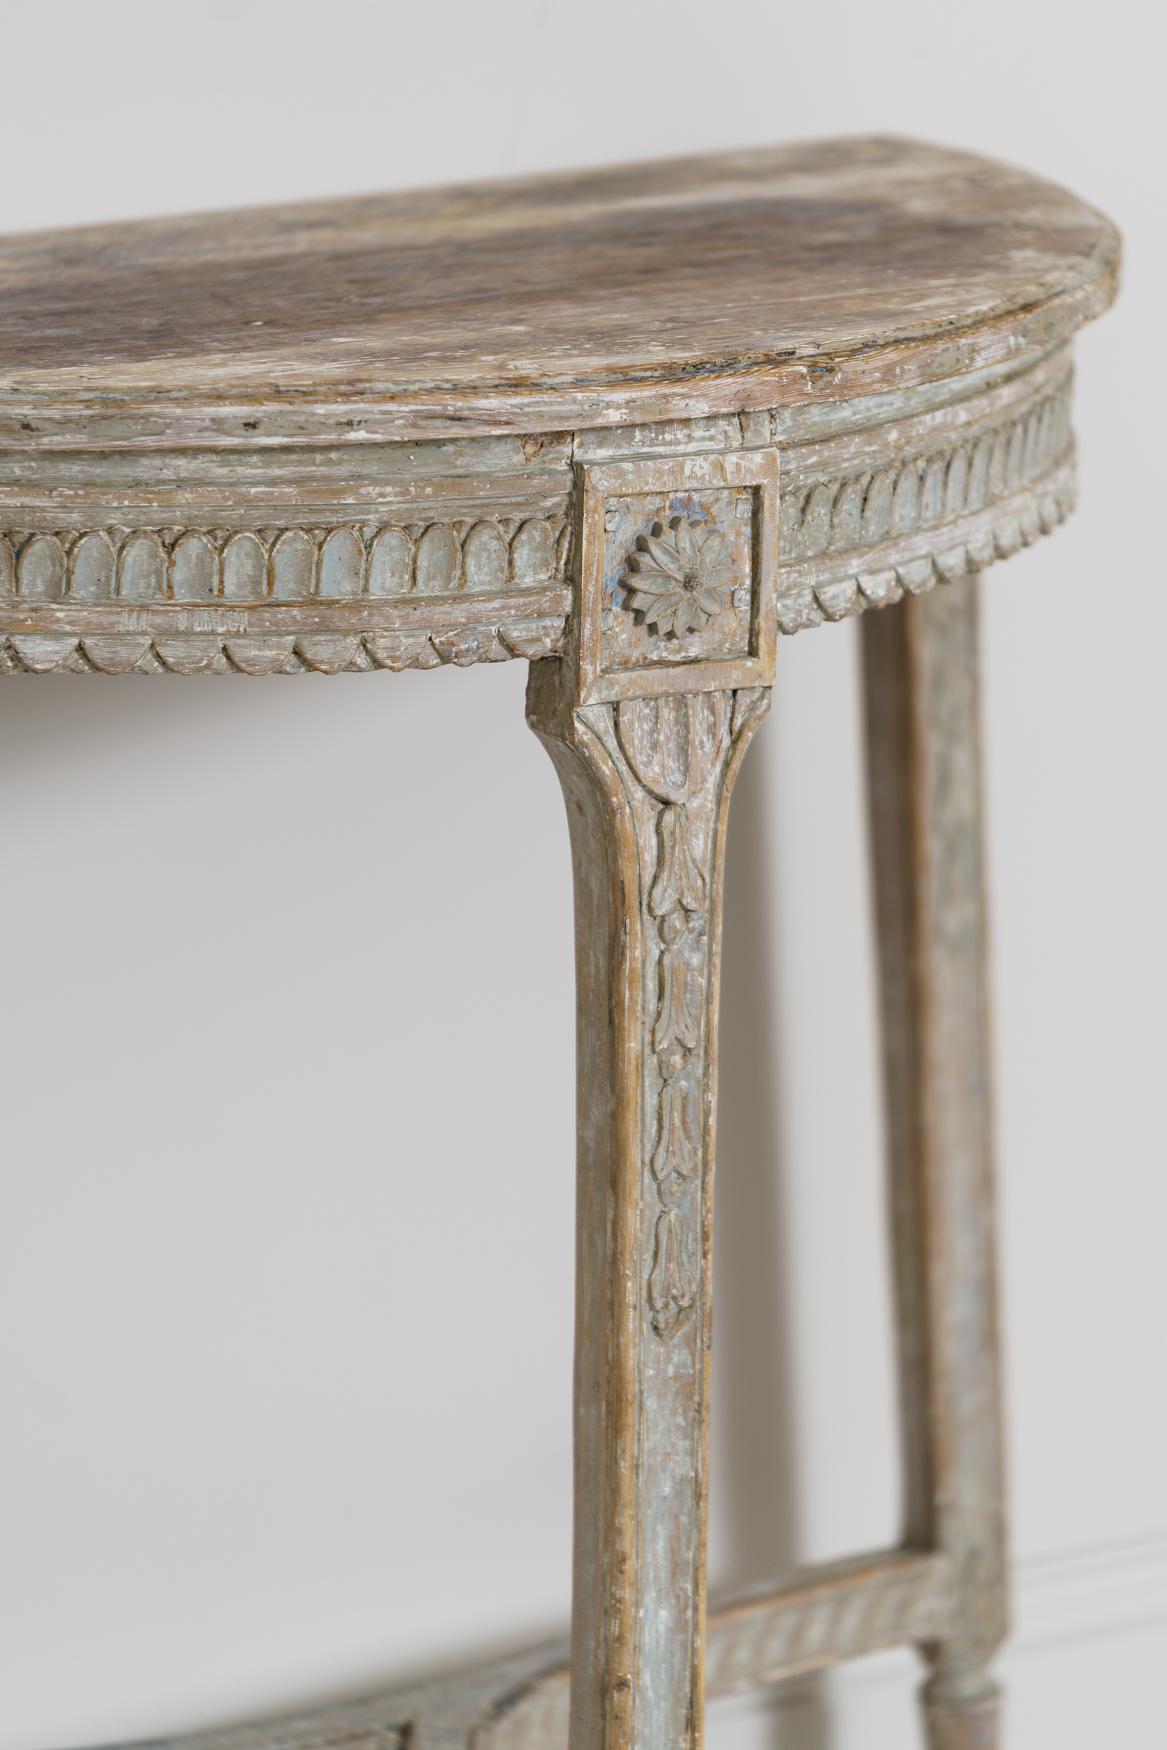 Hand-Carved 18th Century Swedish Gustavian Period Demilune Console Table in Original Paint